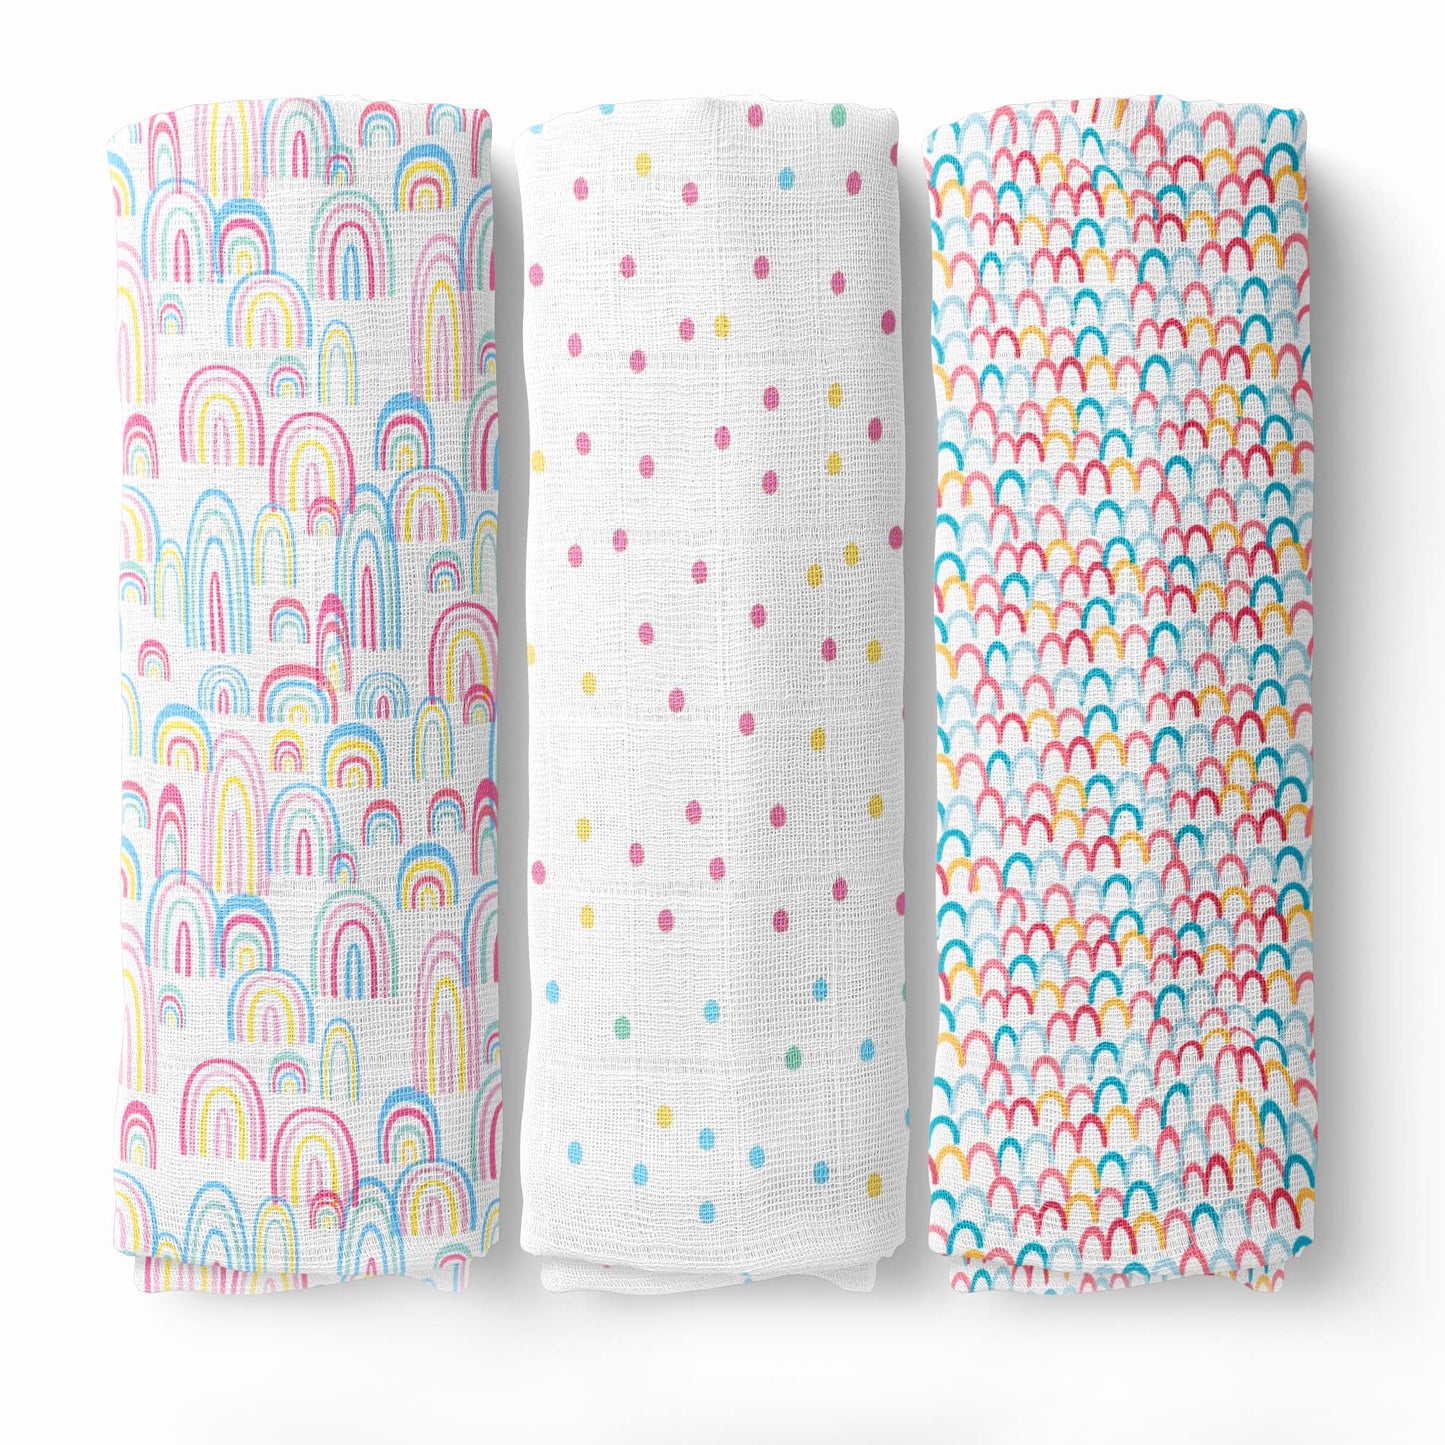 Rainbow Collection 100% Cotton Soft Muslin Swaddles Wrap for Newborn Baby - Pack of 3, Multicolor